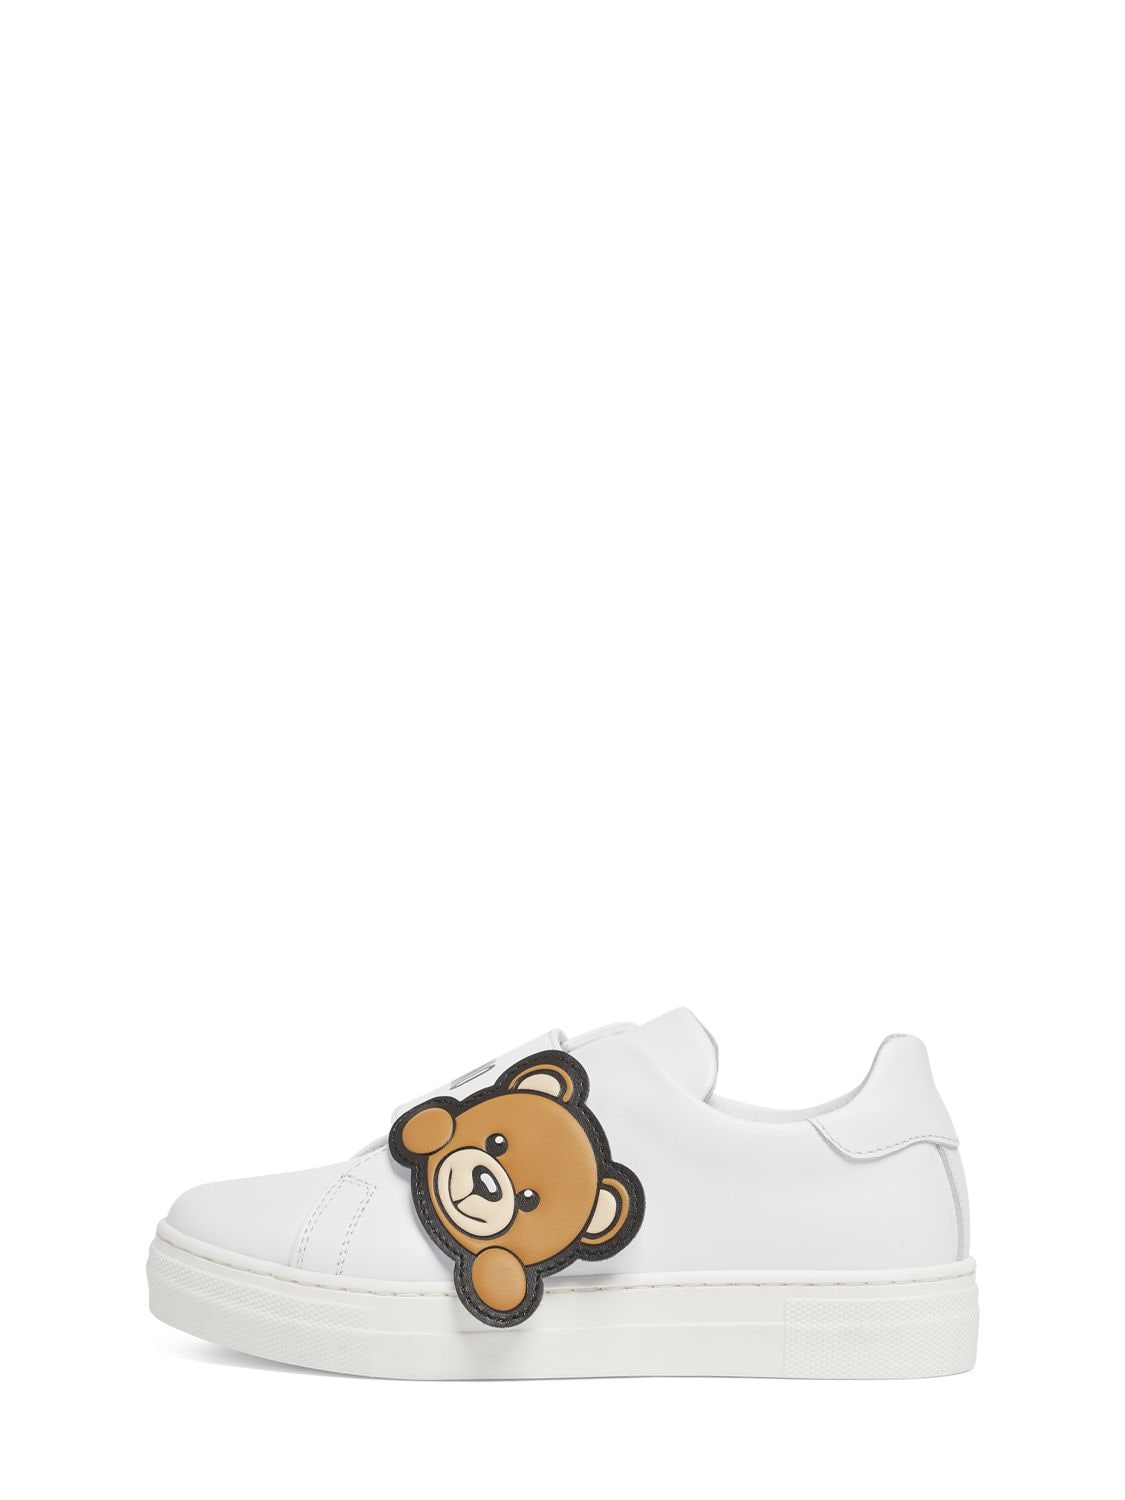 Moschino Kids' Leather Strap Sneakers W/logo In White